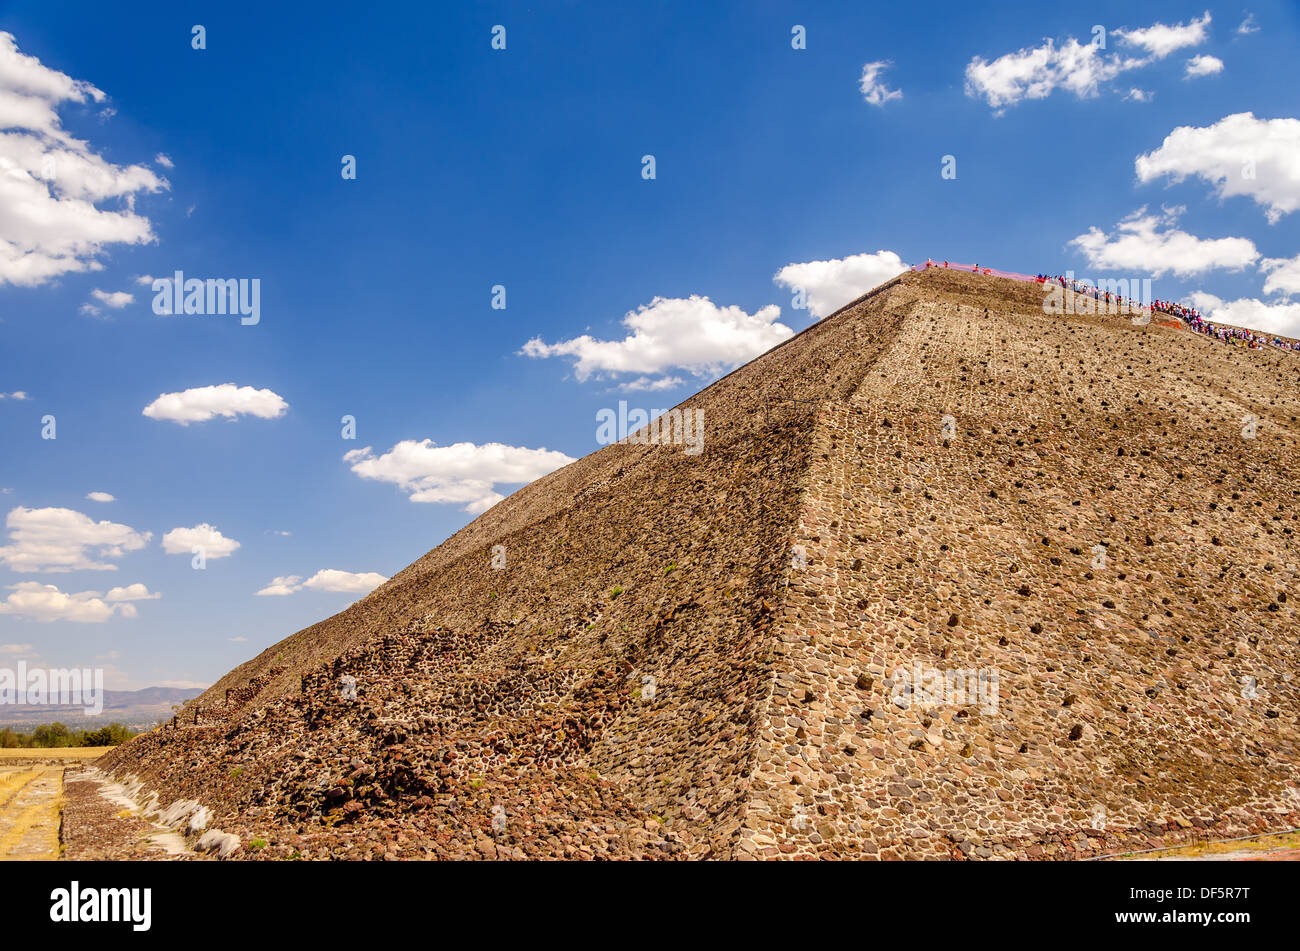 View of the Temple of the Sun at Teotihuacan near Mexico City Stock Photo